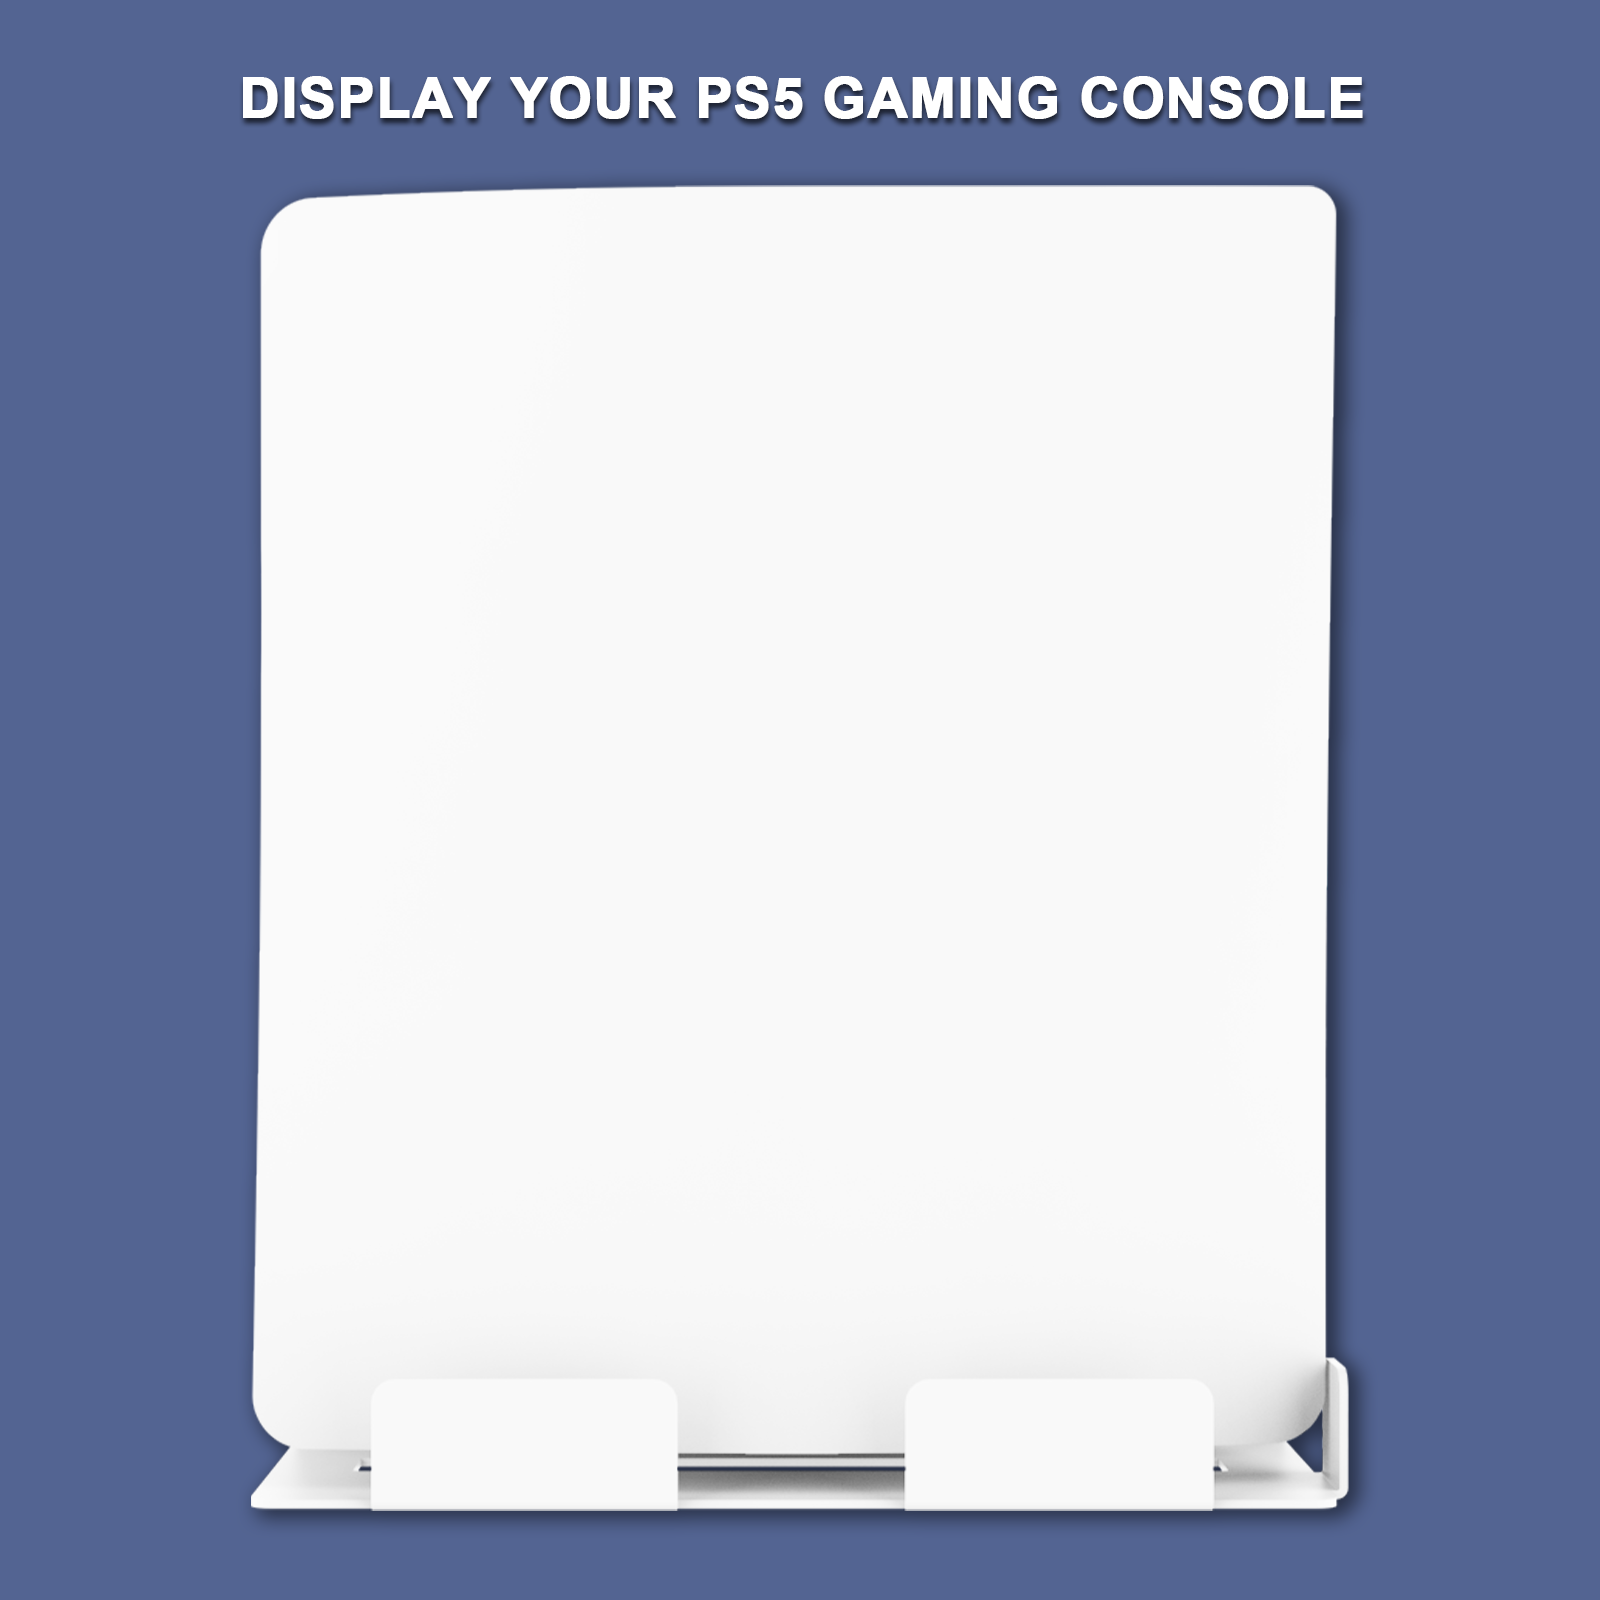 PS5 console securely mounted on the wall.